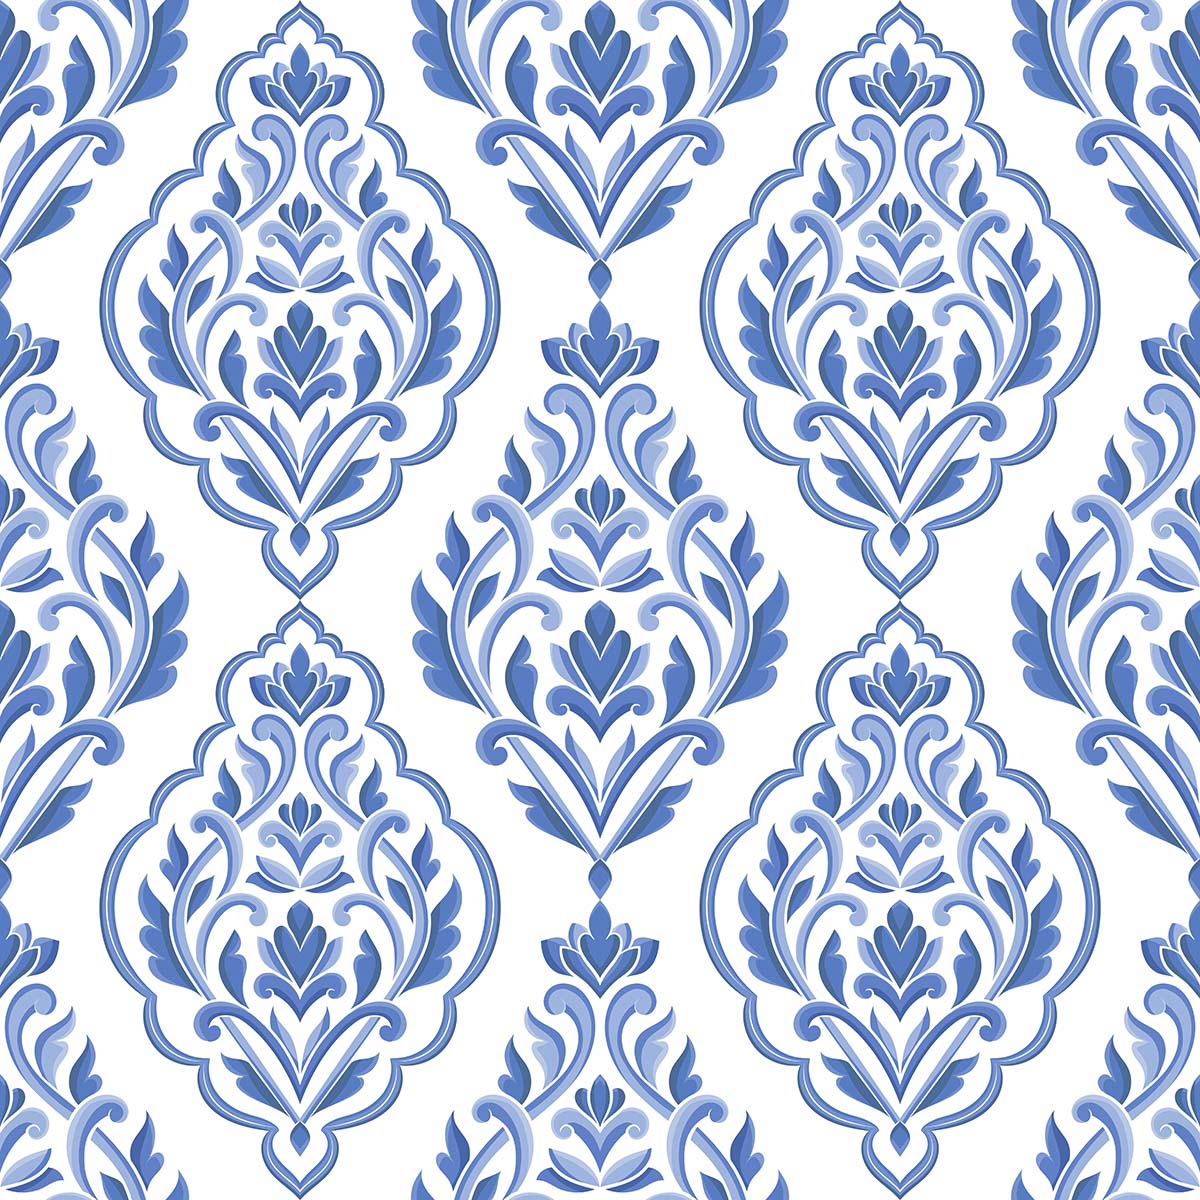 A blue and white pattern